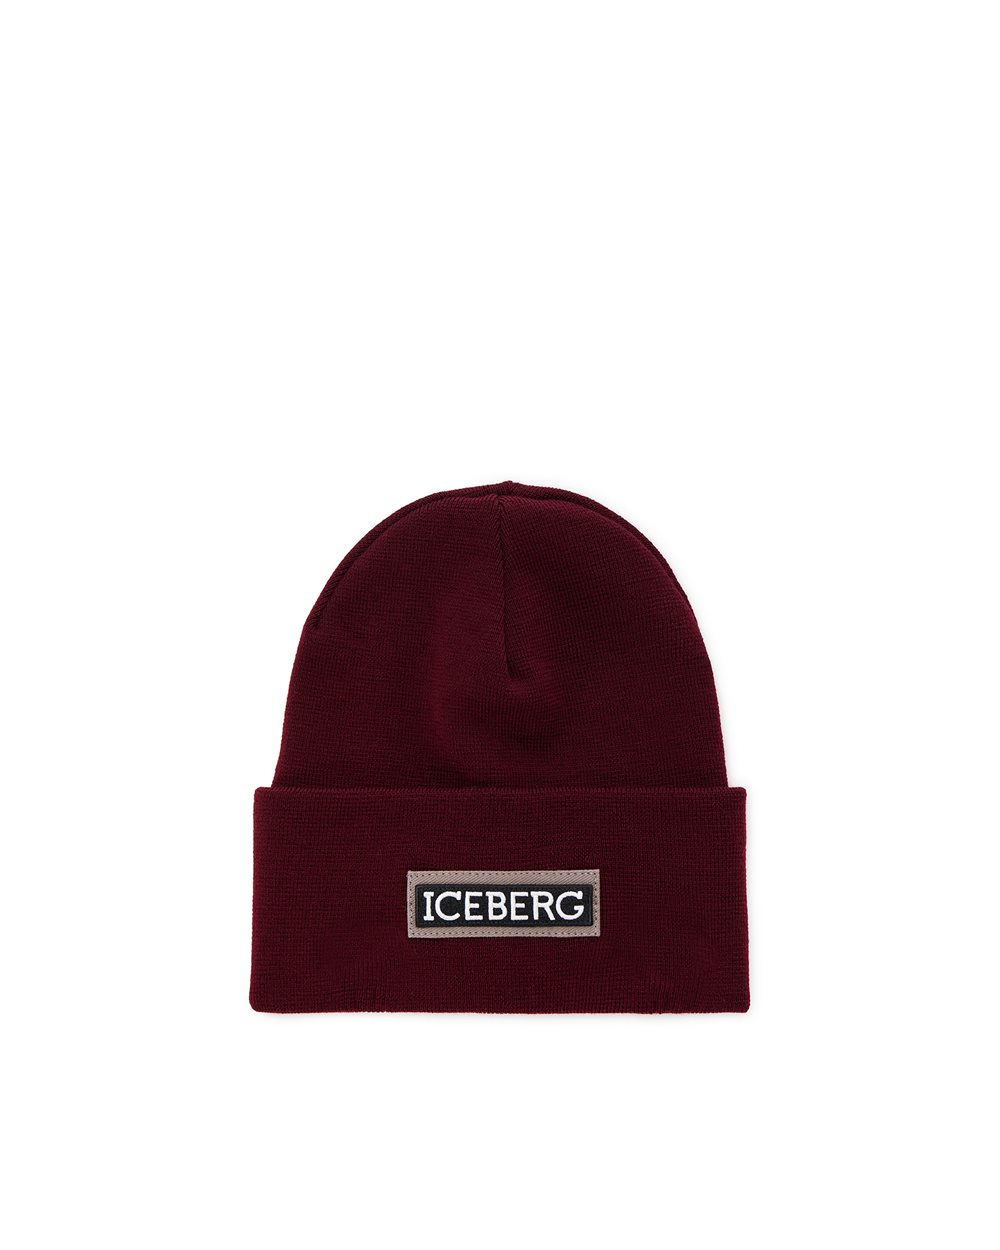 Wool beanie with logo - carosello HP man accessories | Iceberg - Official Website